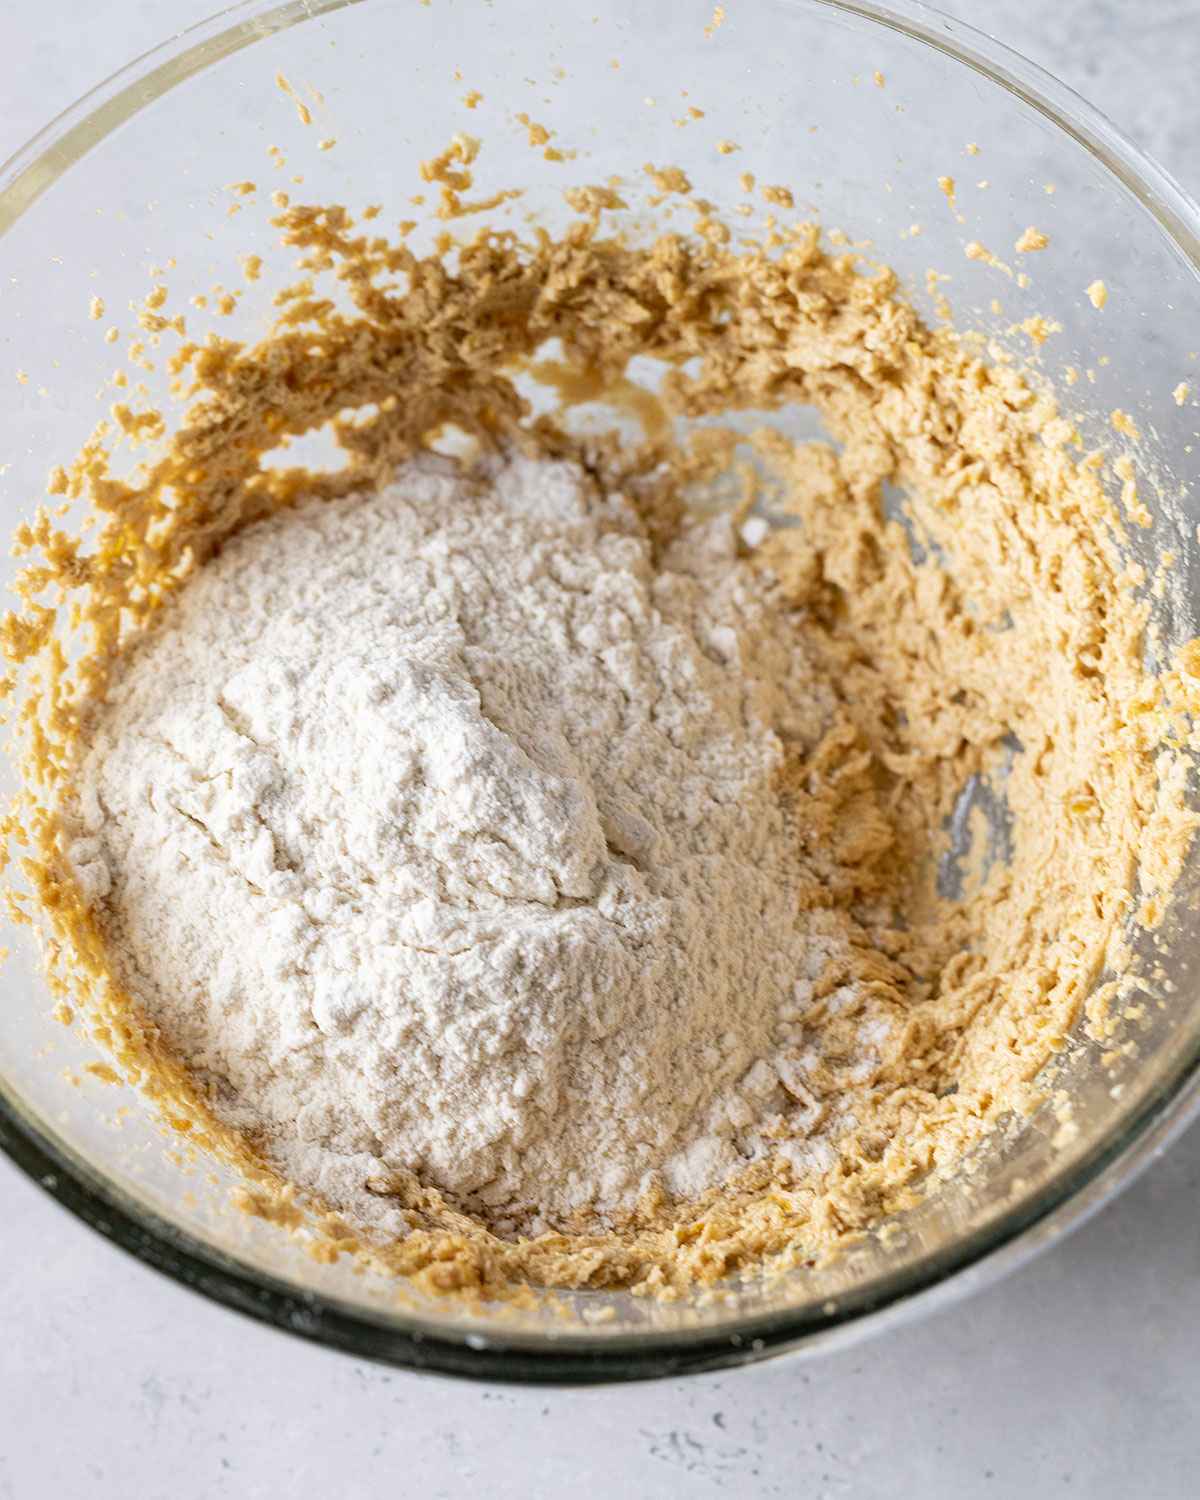 Dry ingredients for cookie dough added to creamed vegan butter and sugar in a mixing bowl.